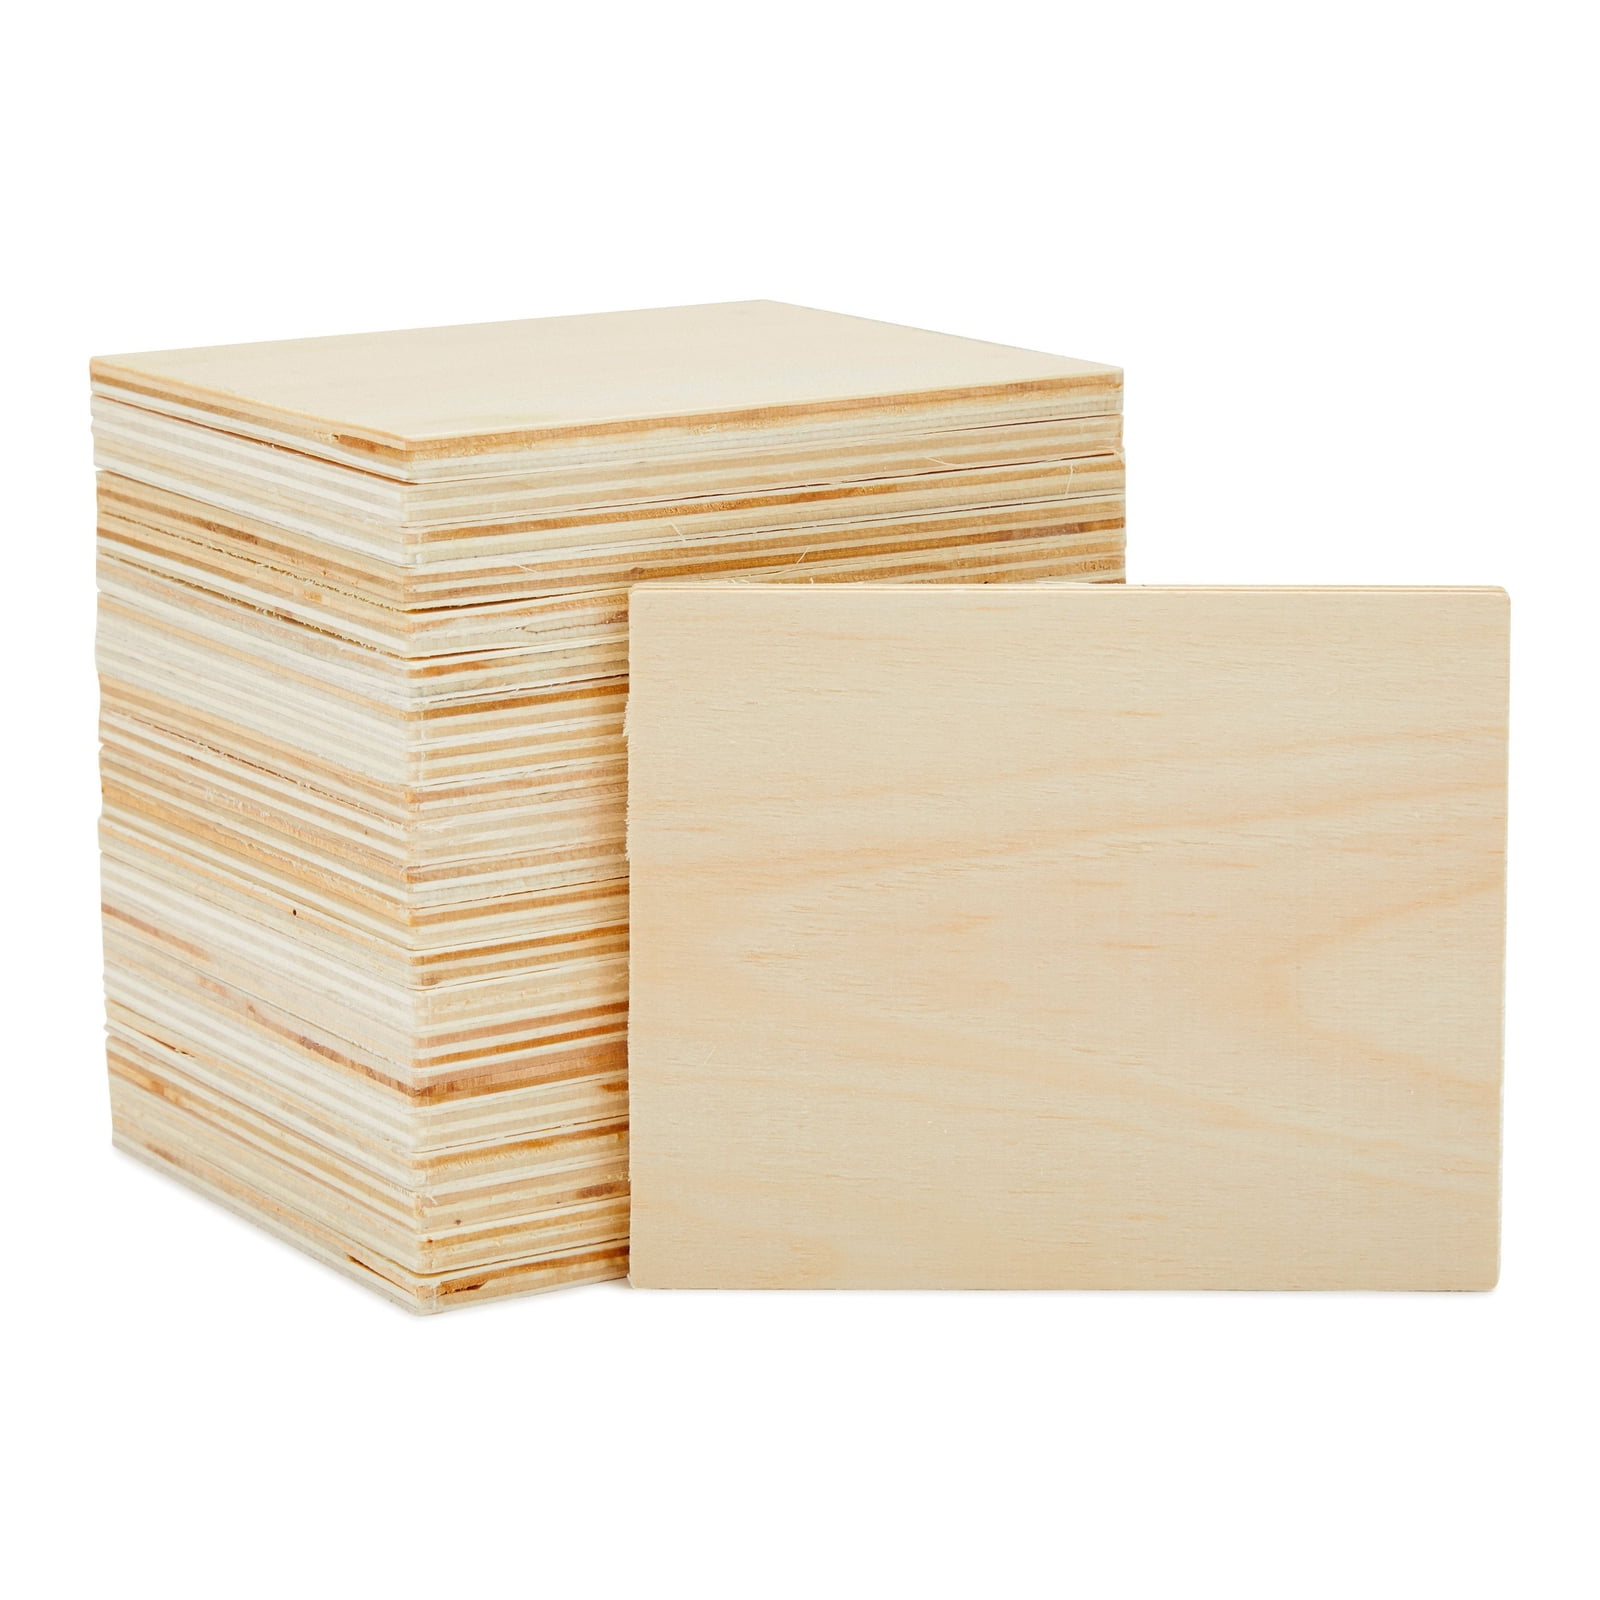 Birch Plywood A4 Sheet 25 pack for crafting lasering scrollsaw BB/BB grade 